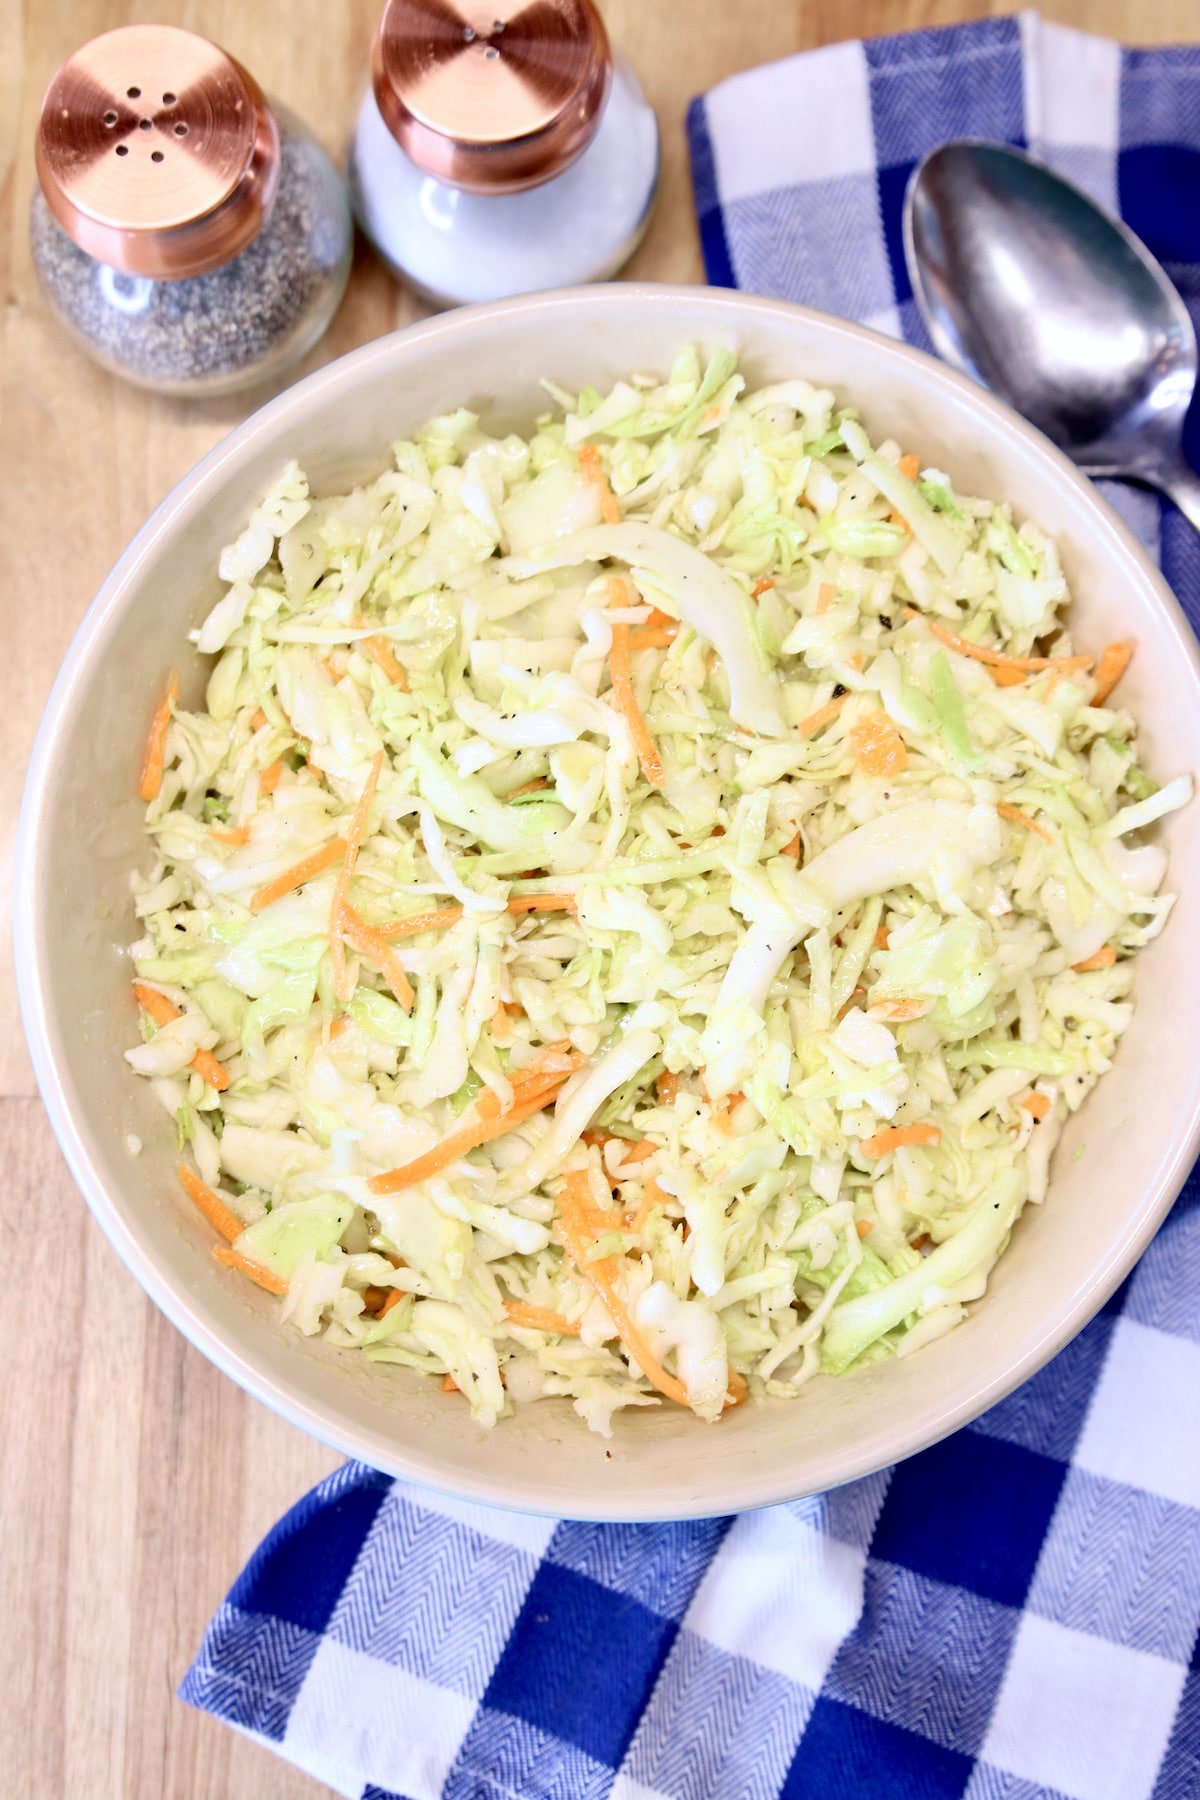 overhead of bowl of coleslaw on a blue check napkin. Salt & pepper shakers to the side.